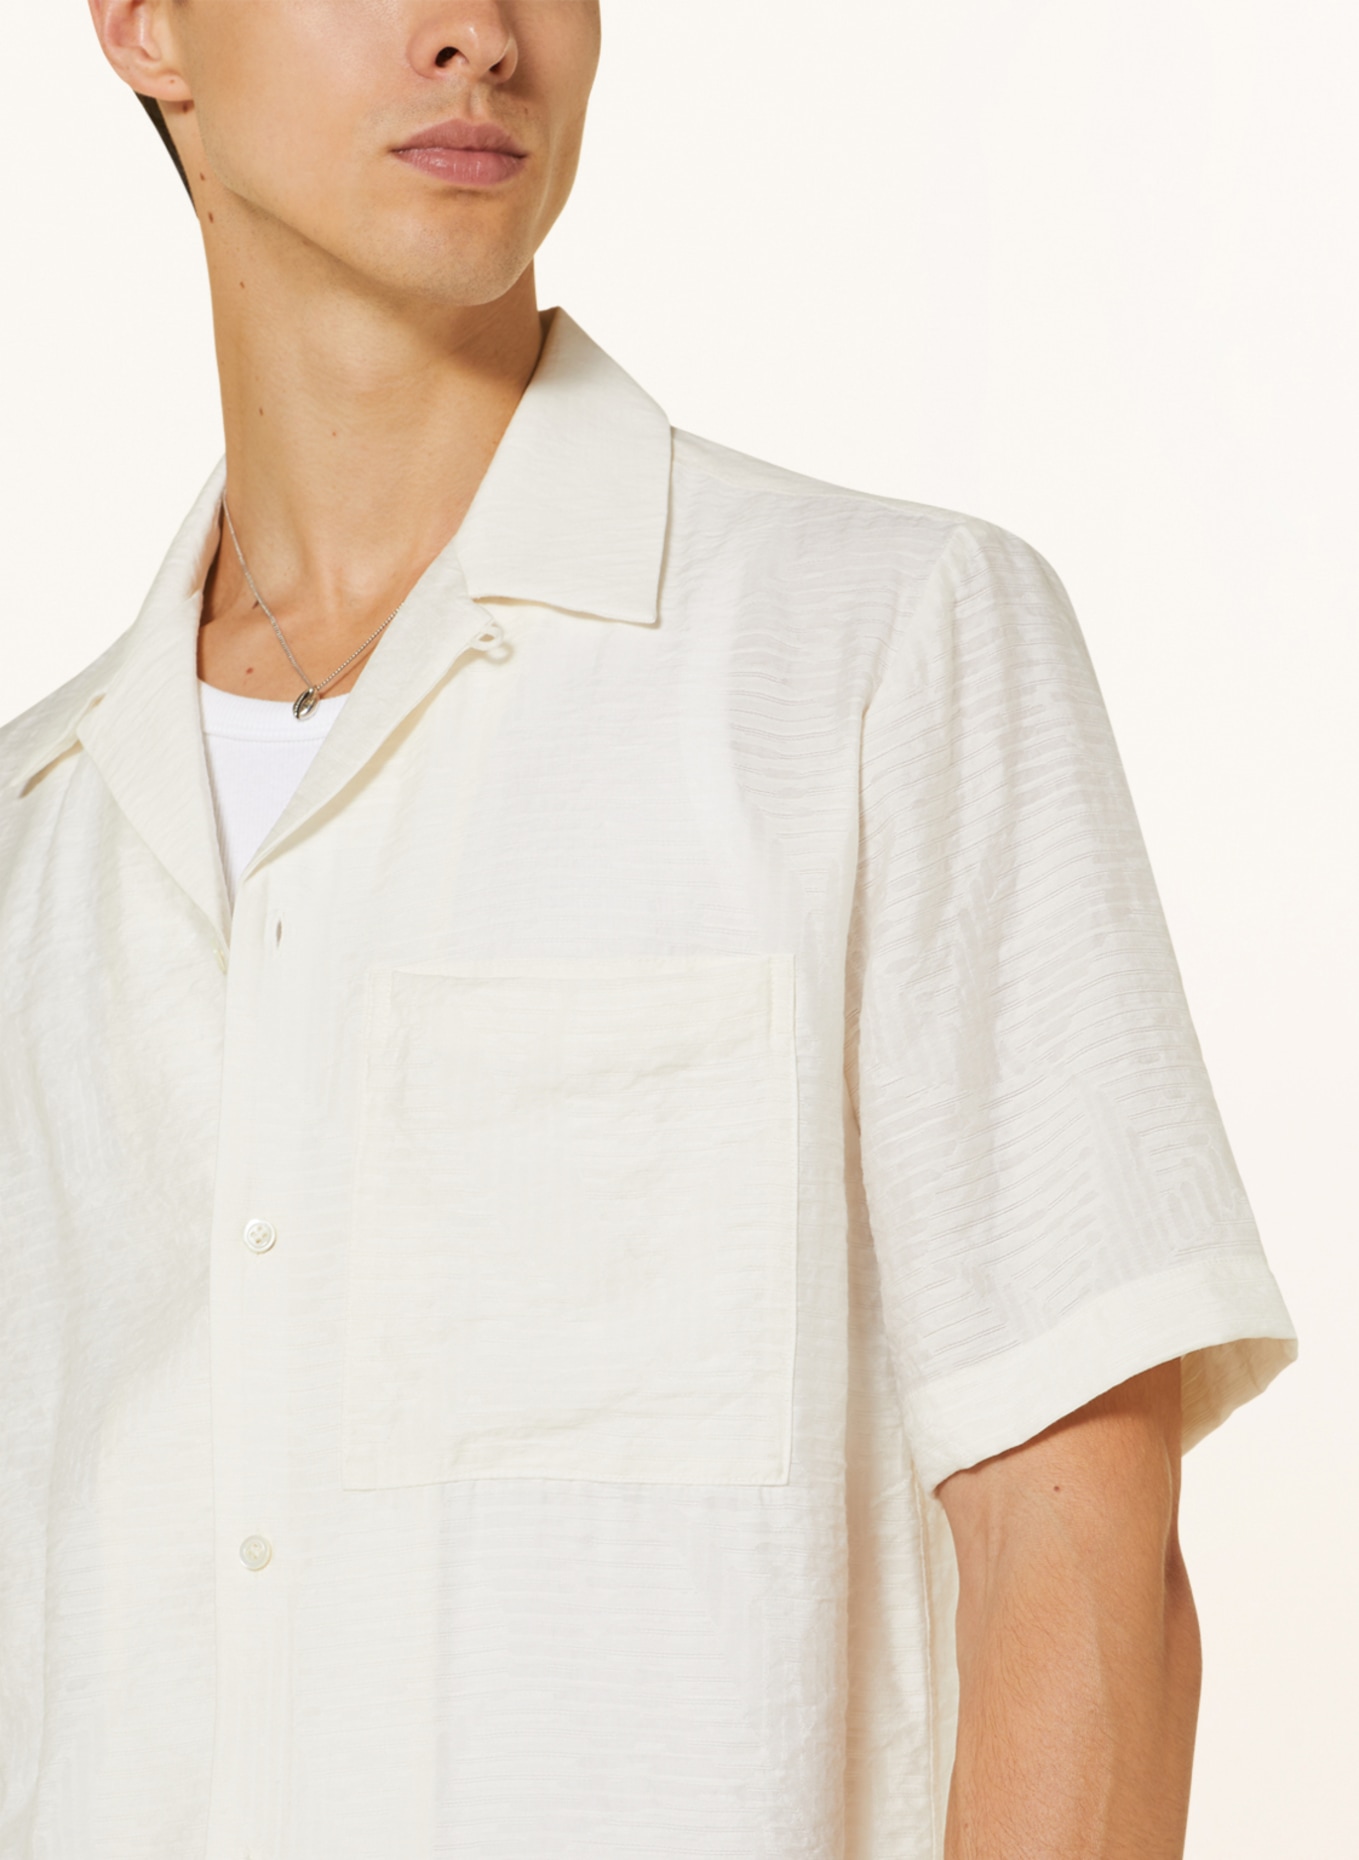 COS Resort shirt relaxed fit, Color: ECRU (Image 4)